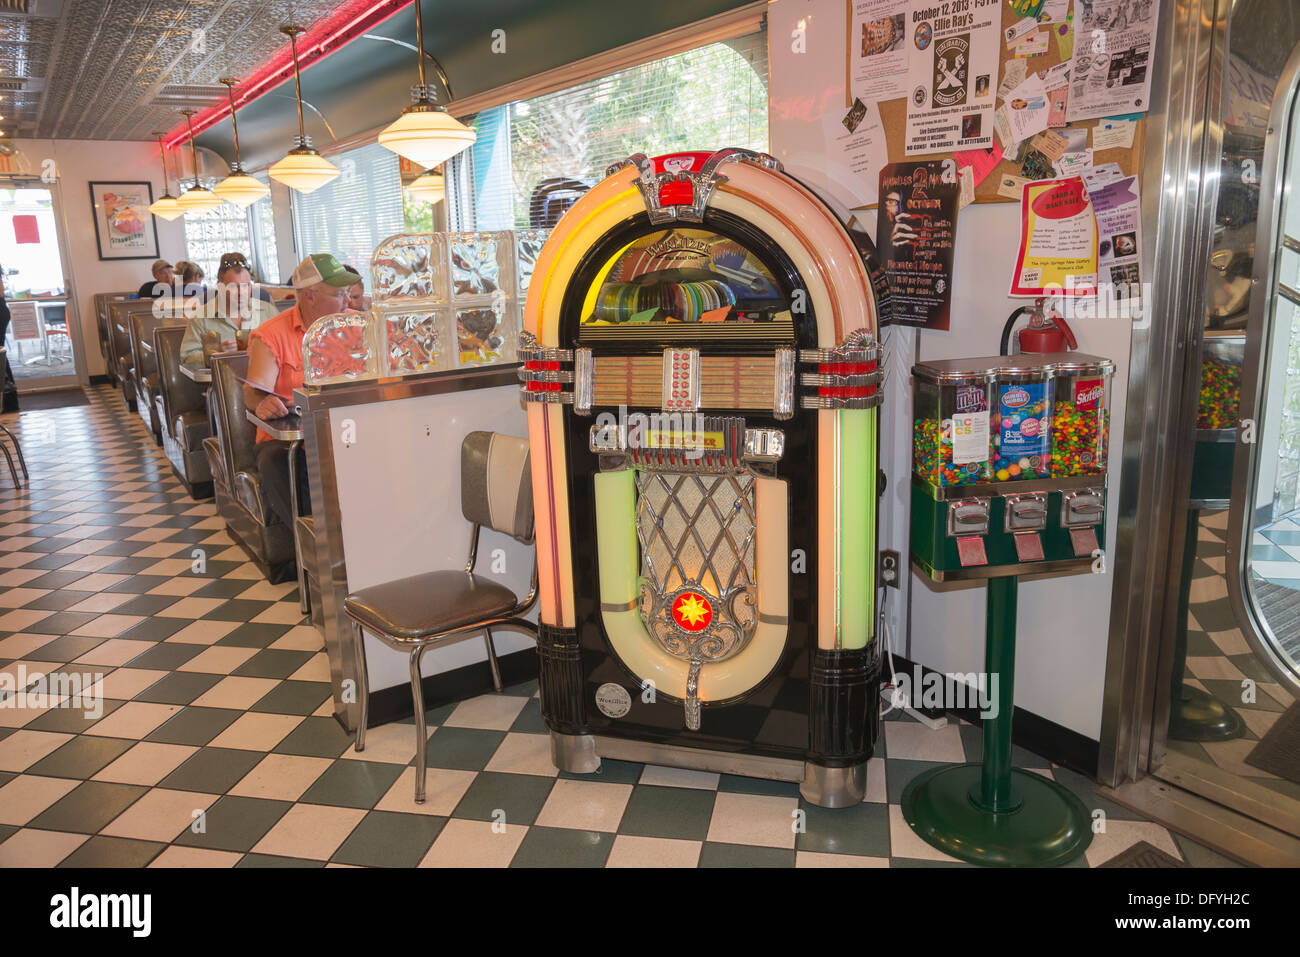 The Diner restaurant in High Springs Florida. Stock Photo